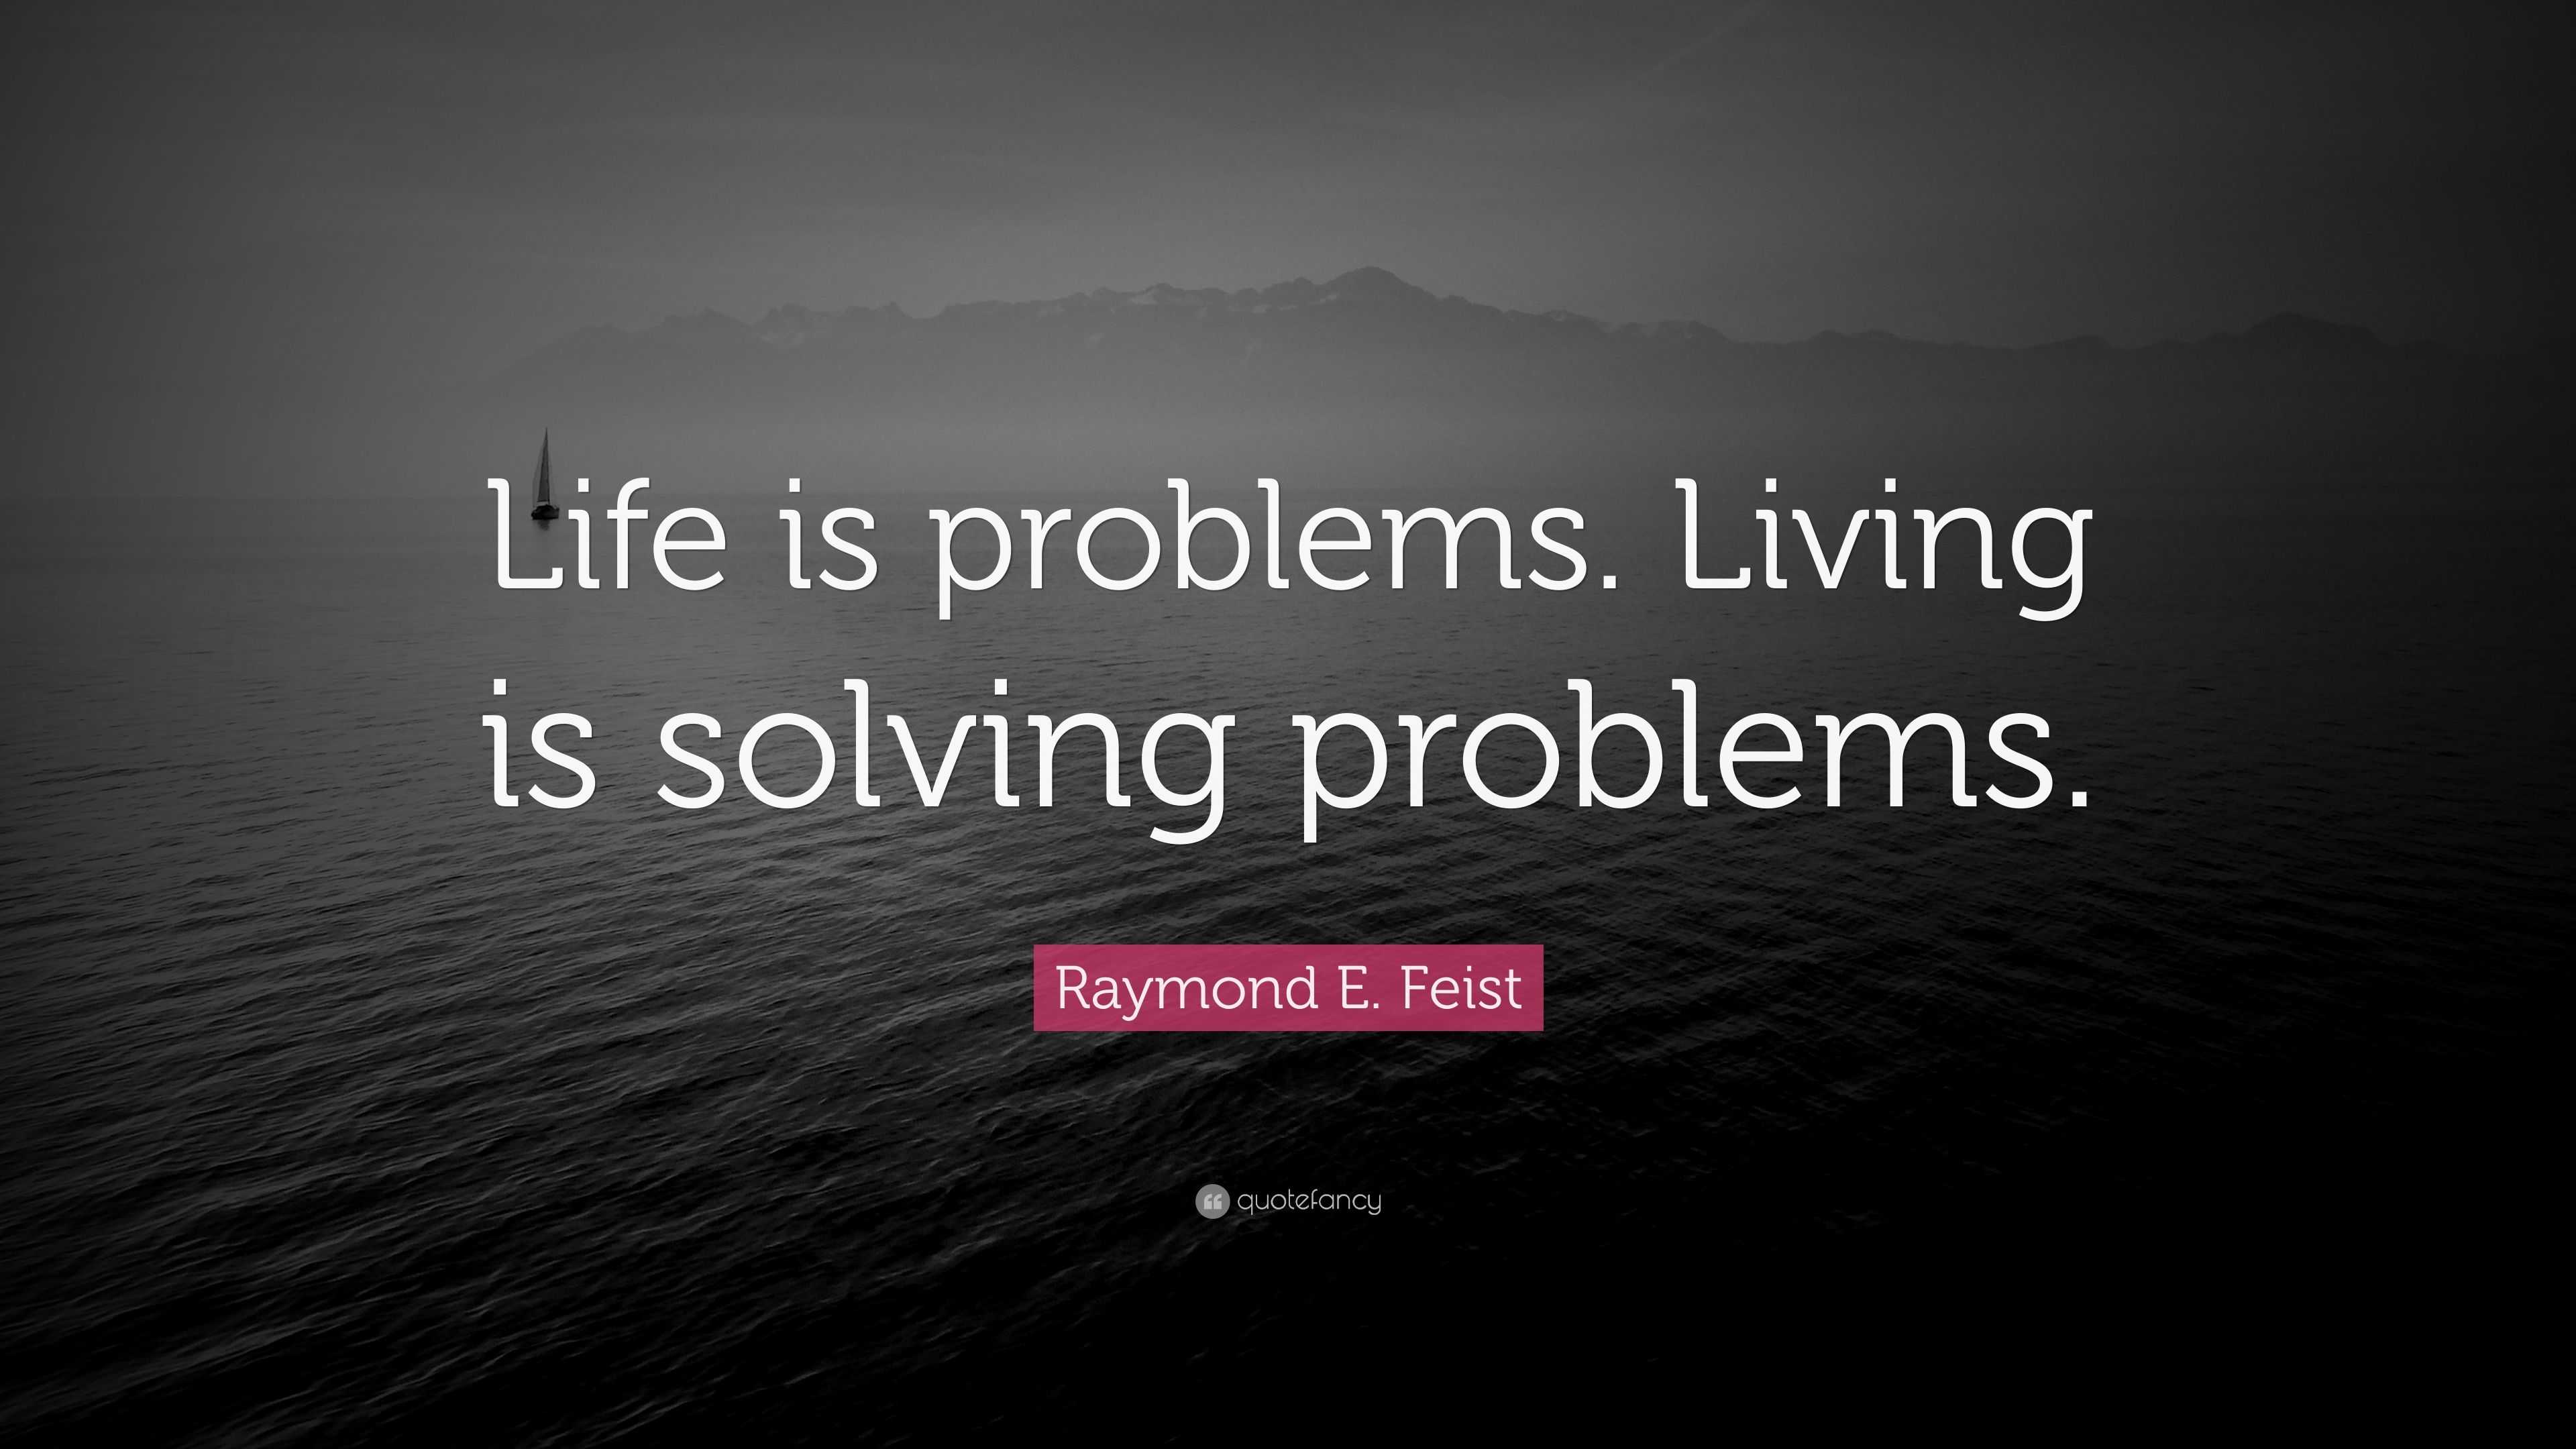 Raymond E. Feist Quote: “Life is problems. Living is solving problems.”